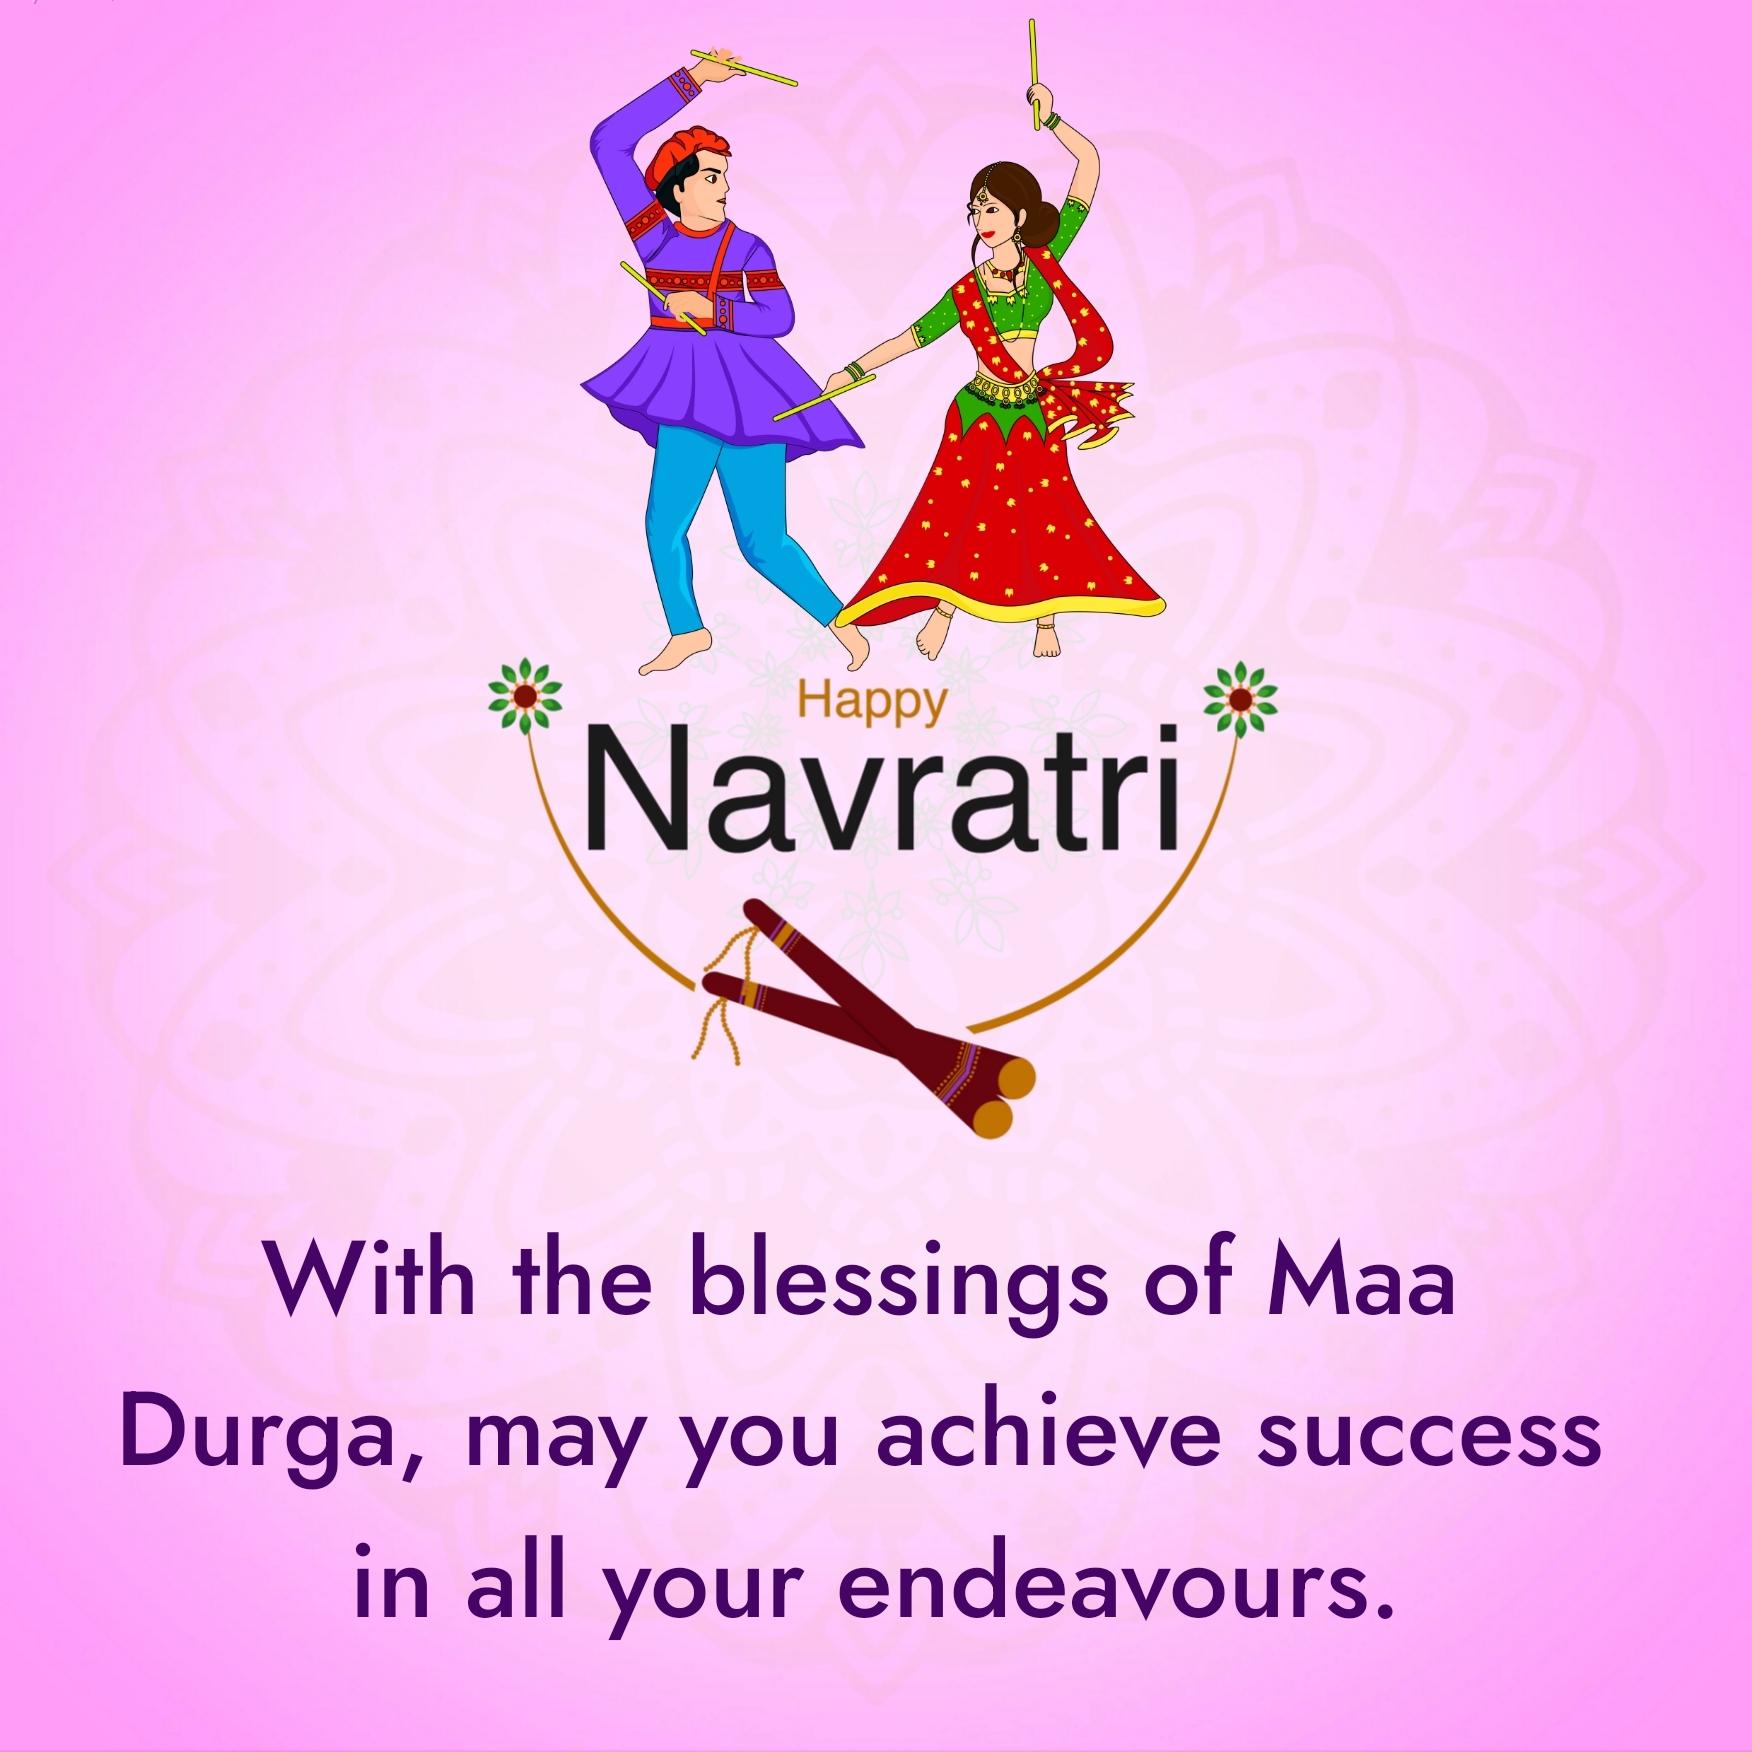 With the blessings of Maa Durga may you achieve success